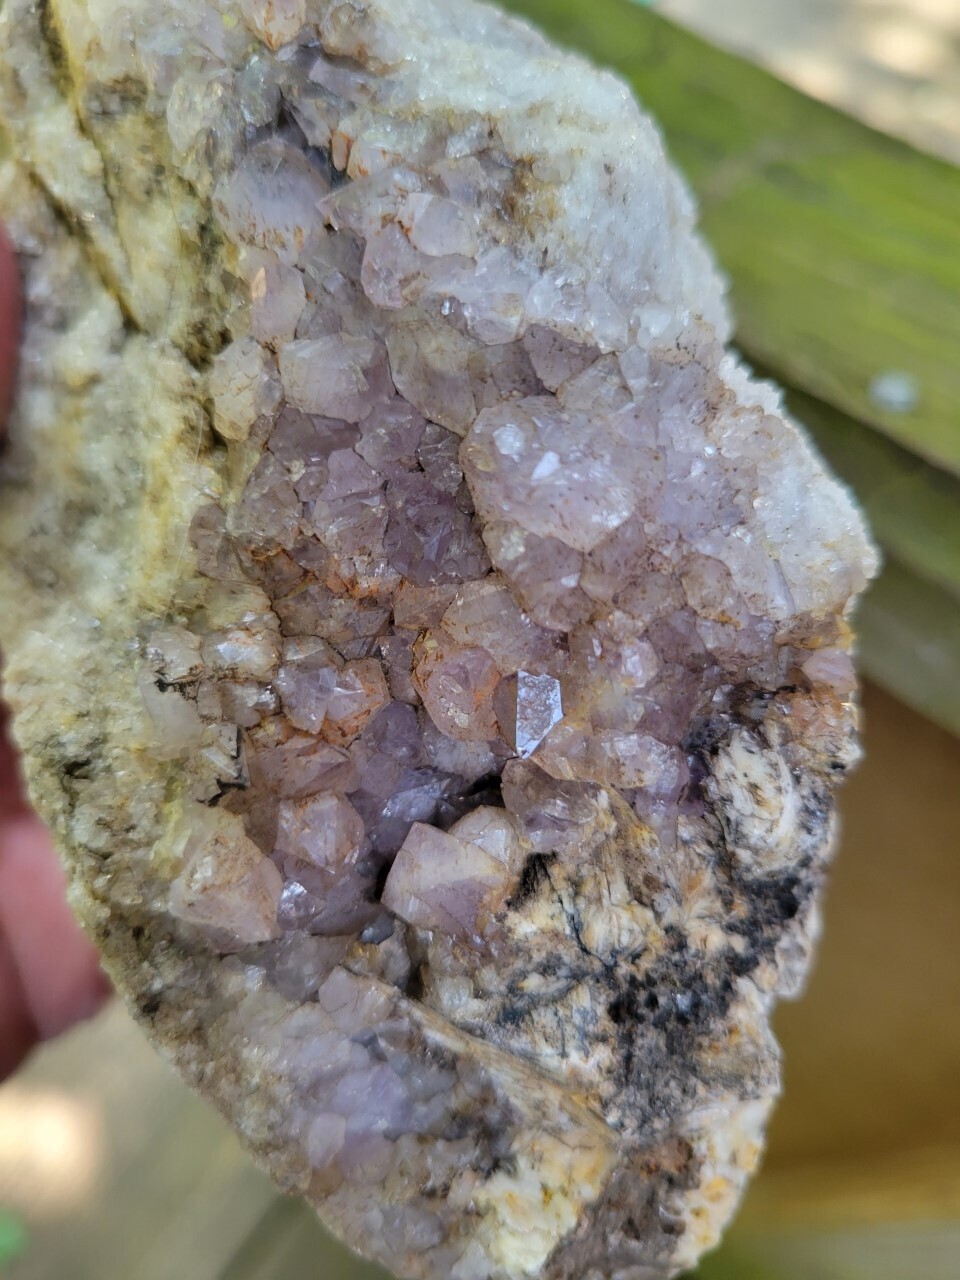 Newfoundland, Canada/ One of a Kind Pieces/Amethyst/clear quartz/calcite/Barite almost 2lbs!!